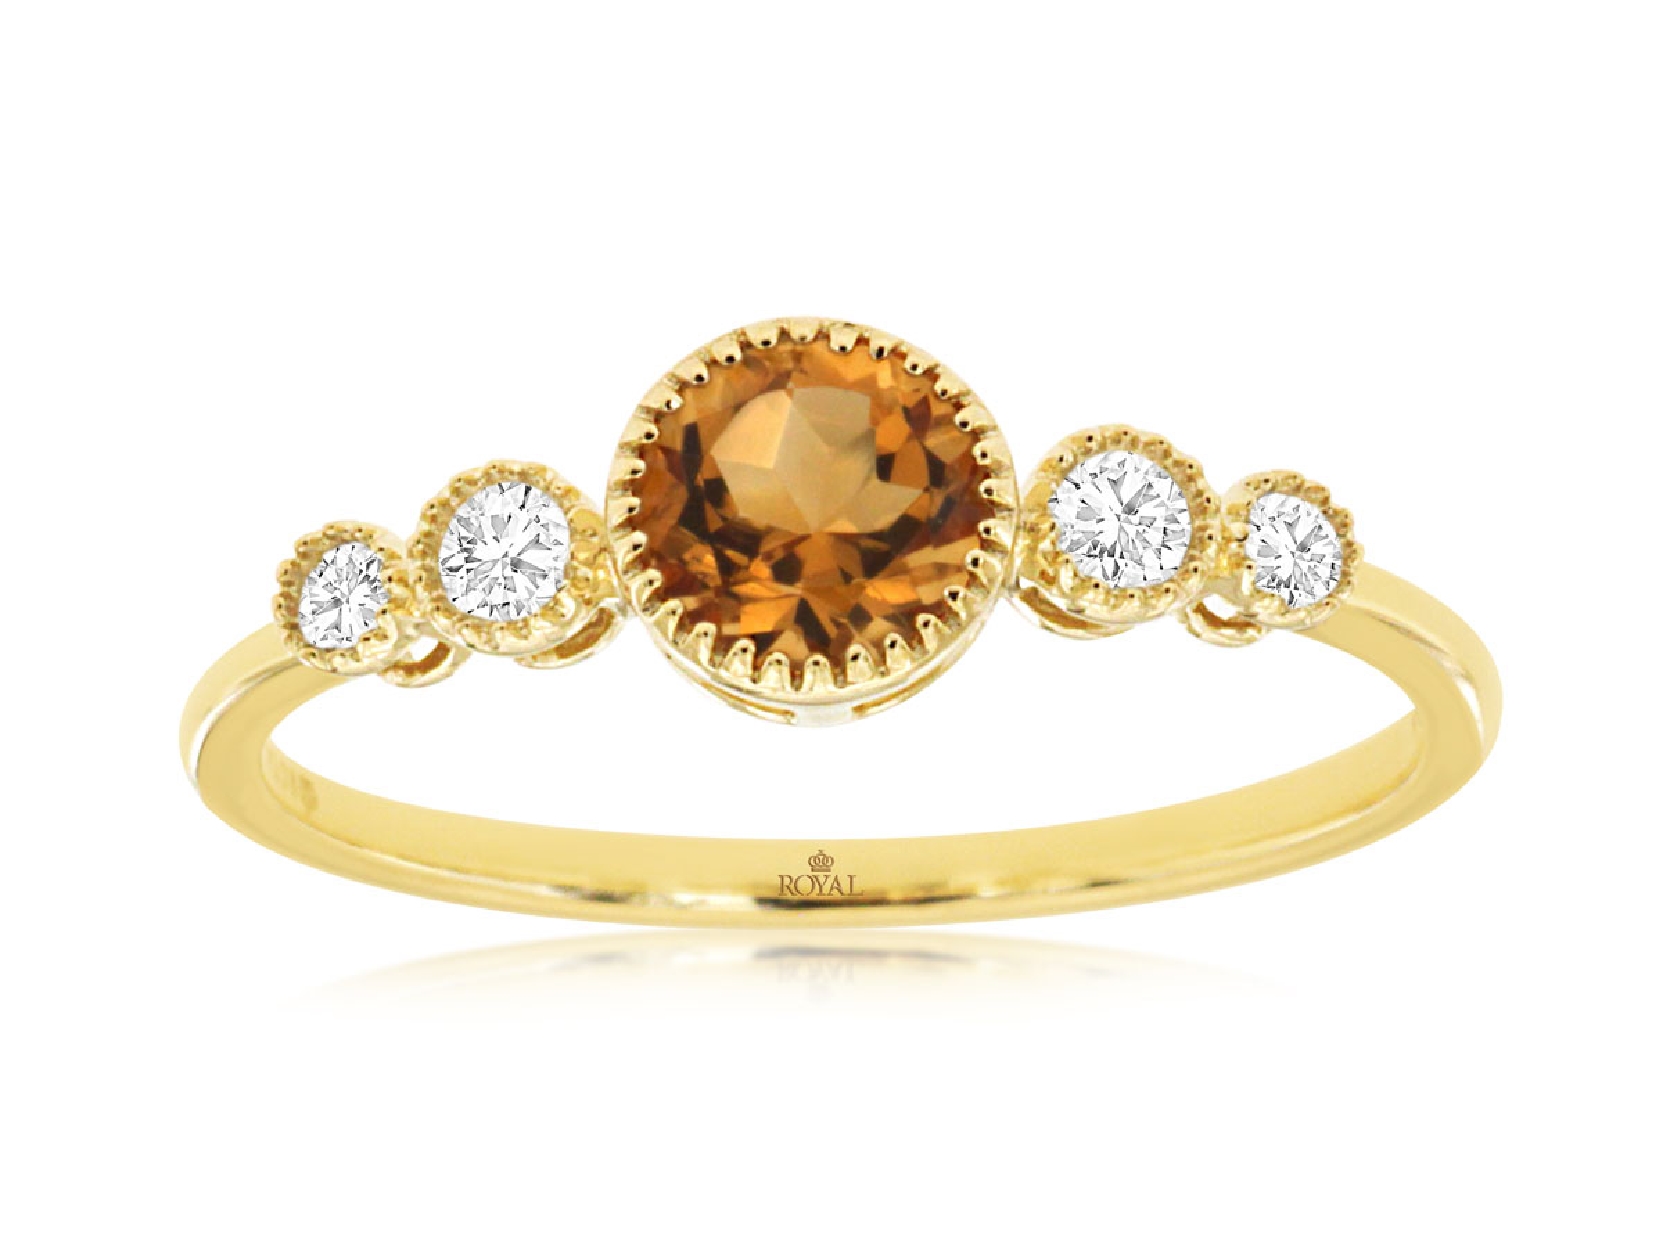 14K Yellow Gold Round Citrine Ring with Four Round Diamond Accents 

Size 7.25
.11cttw Diamonds
.45ct Citrine